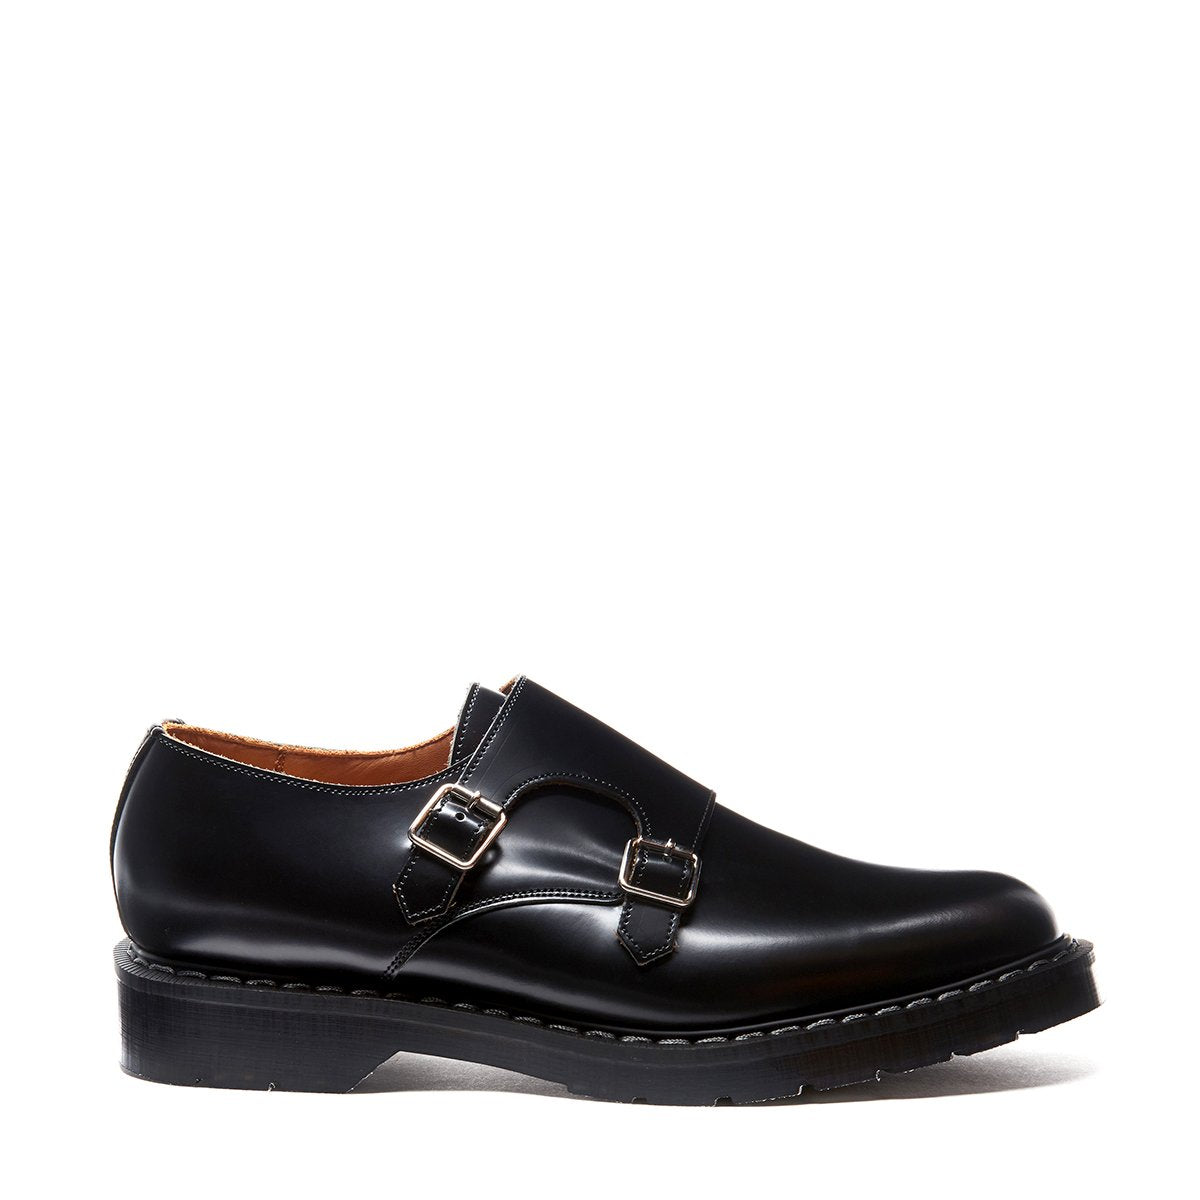 Men's flat shoes with handmade buckles in black calf leather